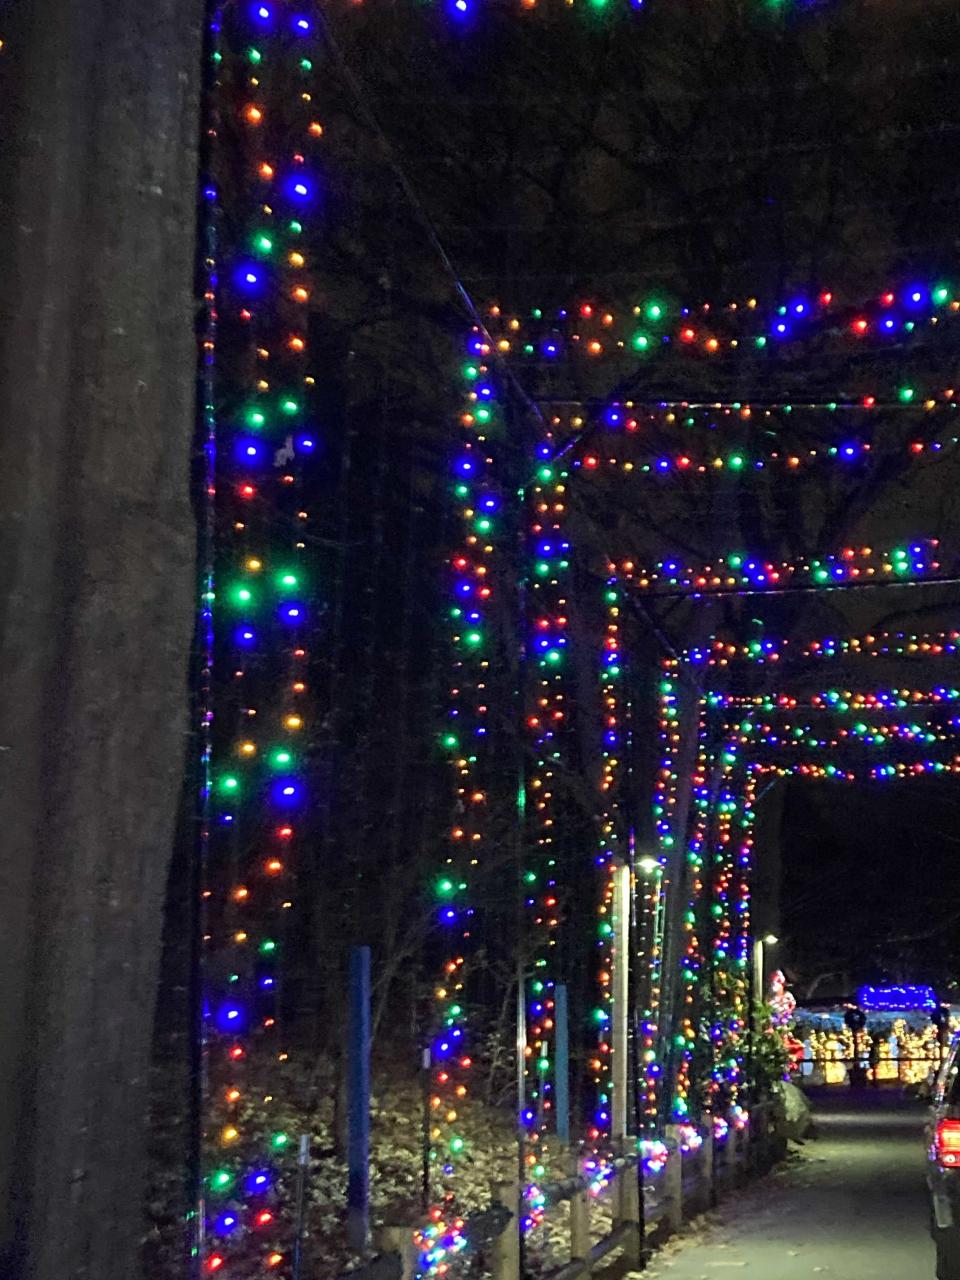 Guests enter a tunnel of lights as they head into the light display (Rachel Nunes/Patch)